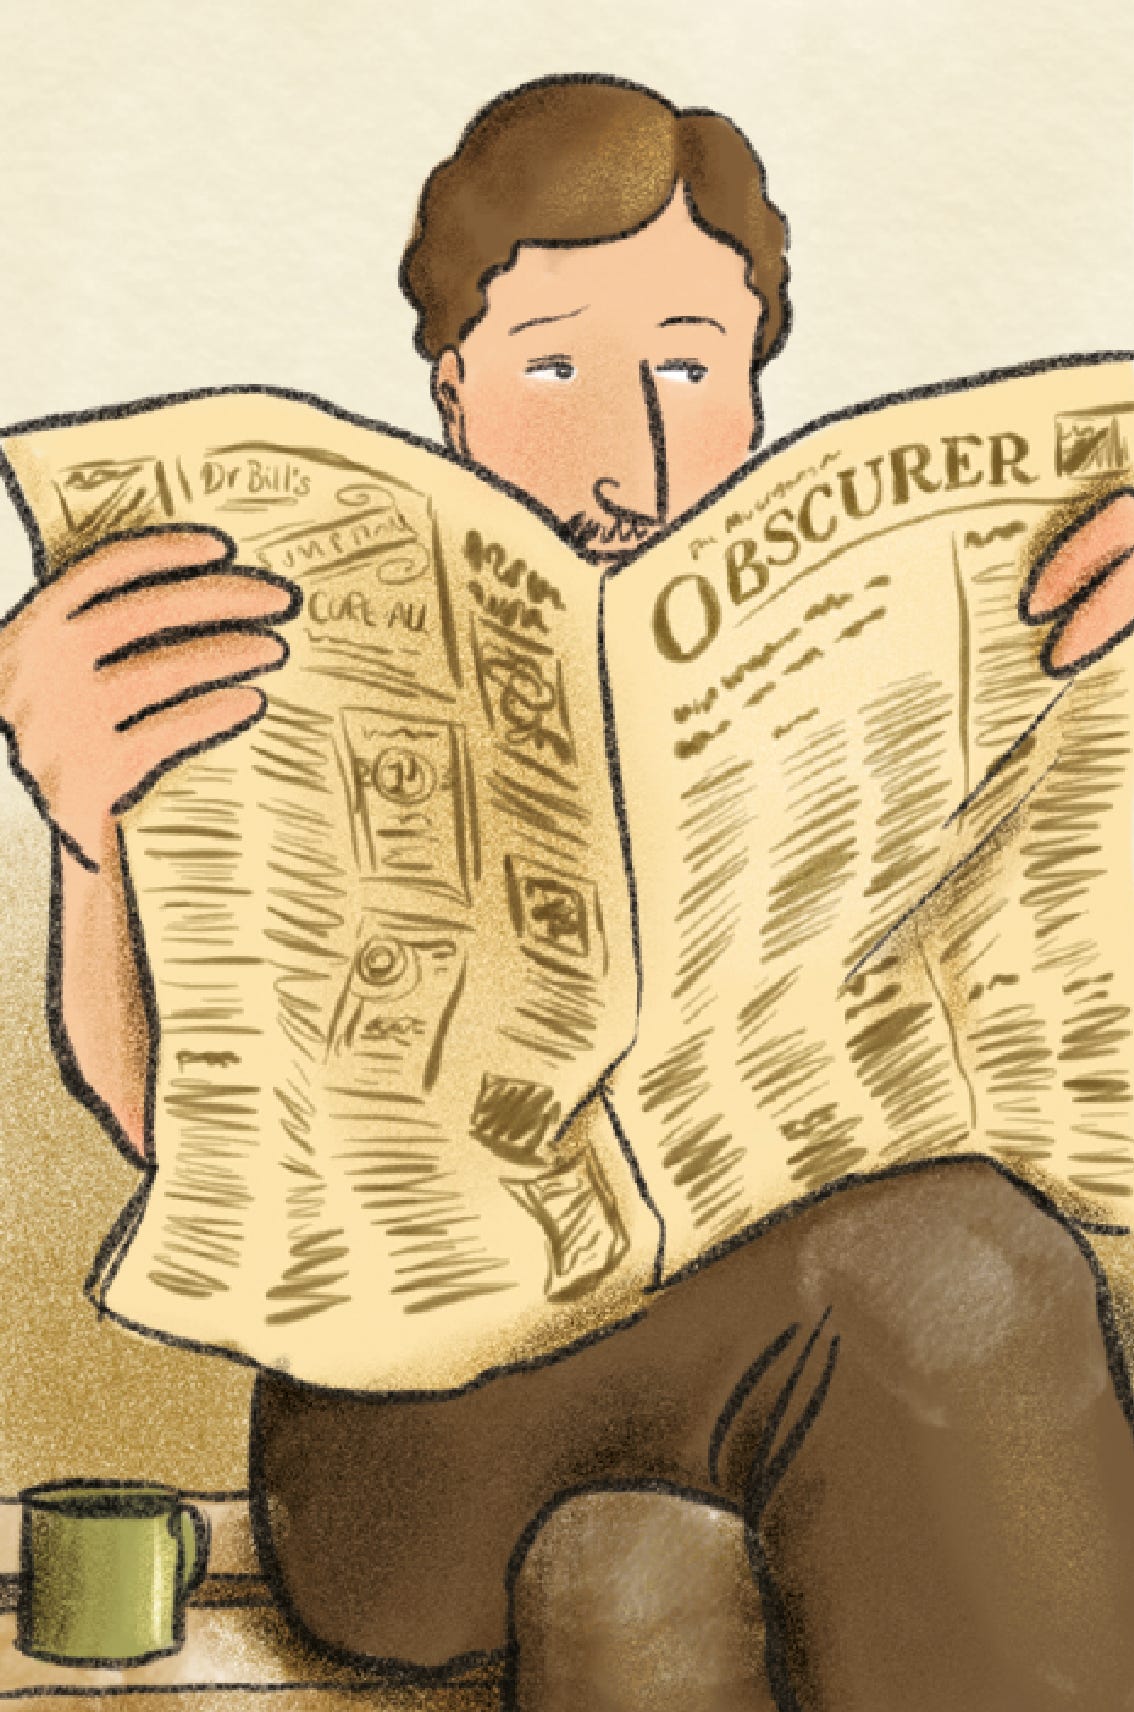 Barrington reads the newspaper in The Ragged Trousered Philanthropists graphic novel